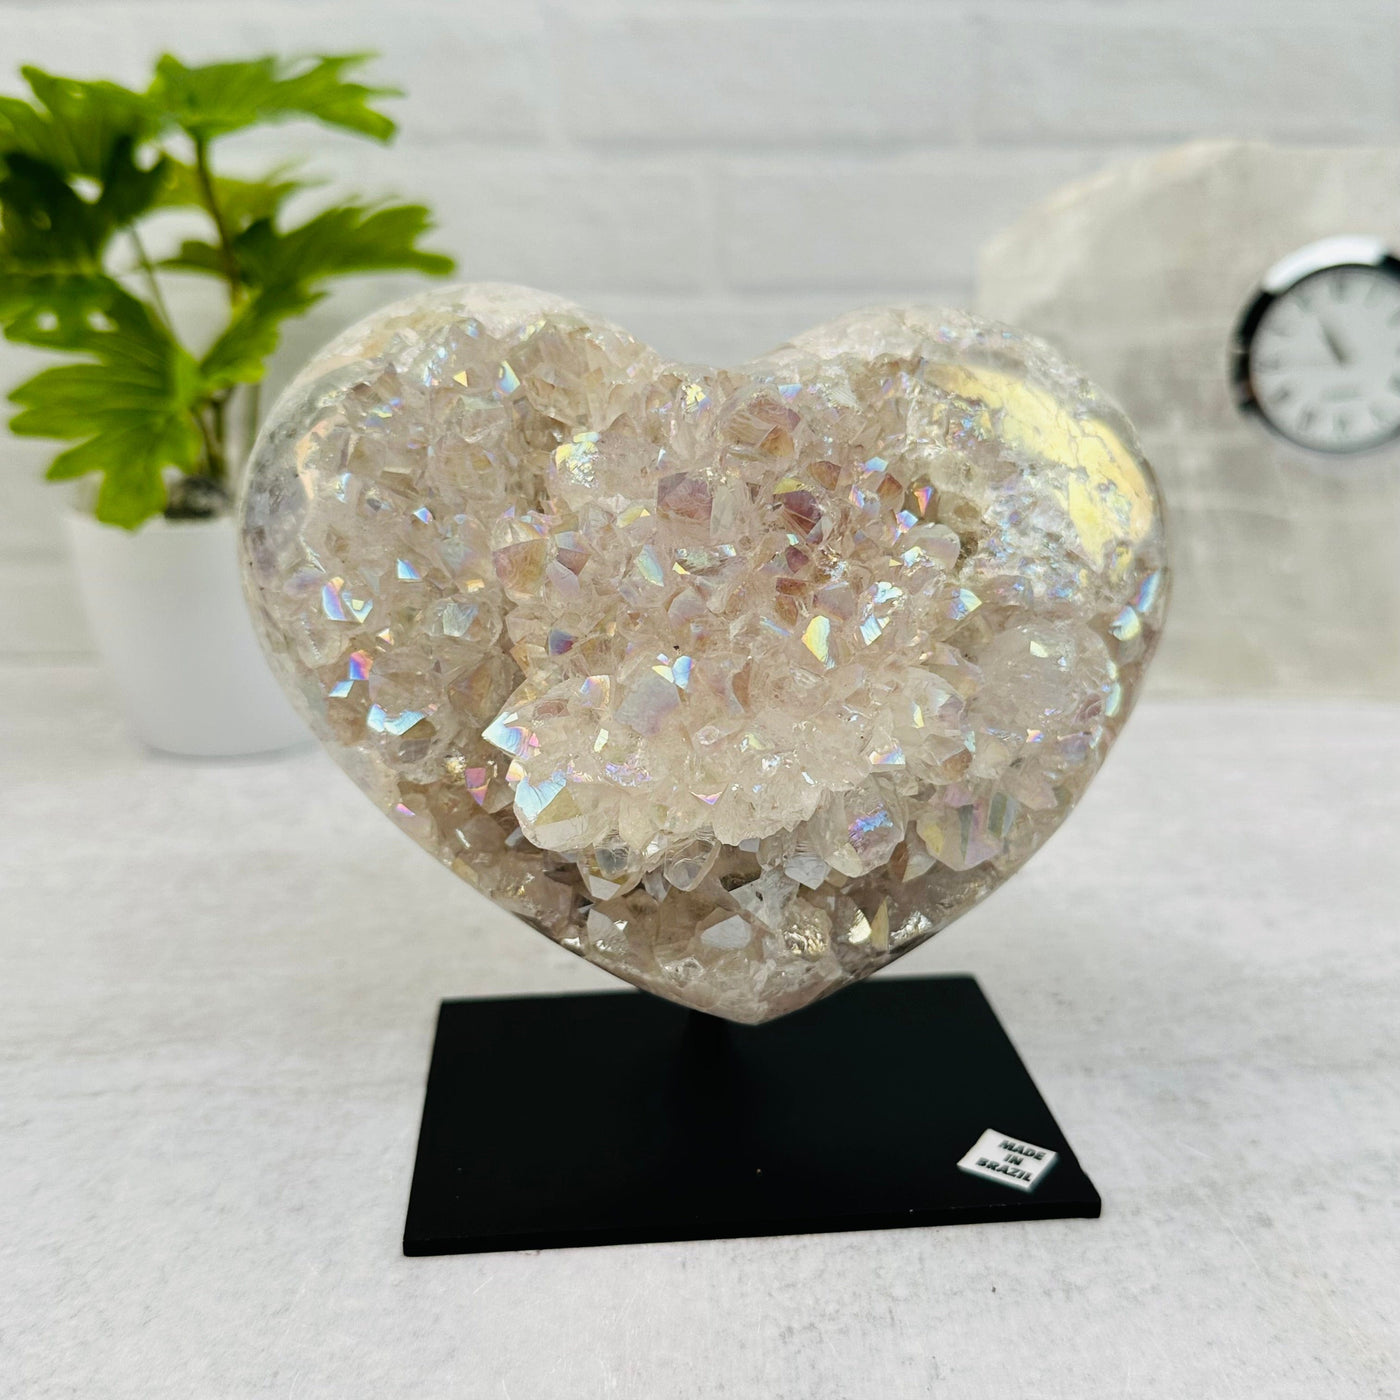 Amethyst Druzy Crystal Heart with Angel Aura on Metal Stand displayed as home decor 